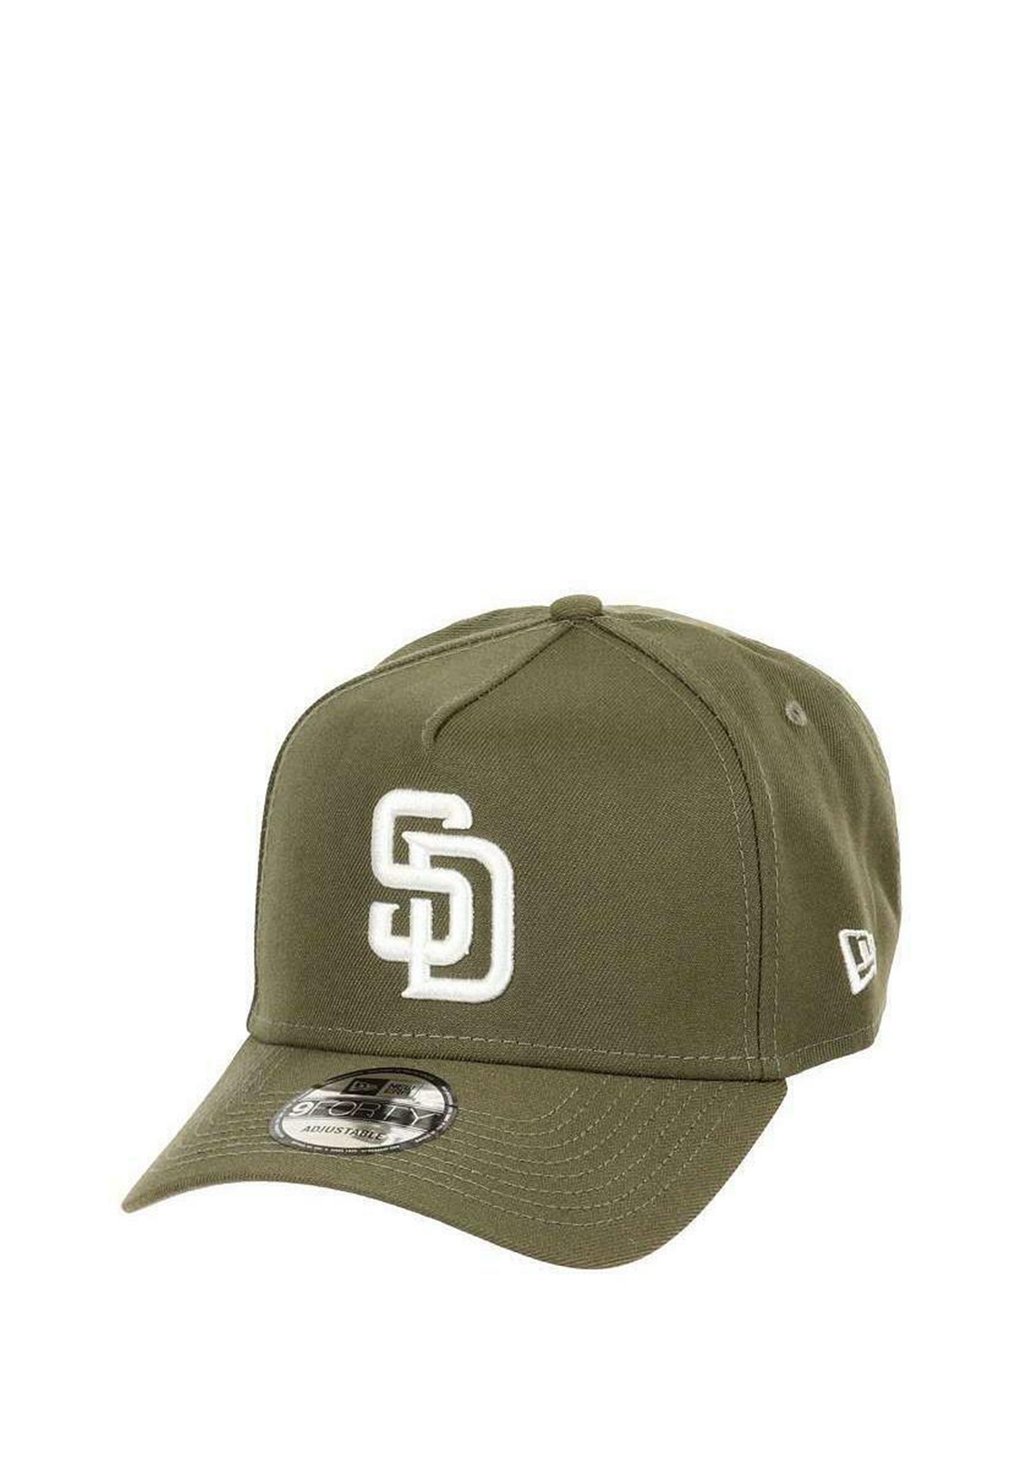 Бейсболка SAN DIEGO PADRES MLB ALL-STAR GAME 2016 SIDEPATCH COOPERSTOWN NEW FORTY A-FRAME SNAPBACK Era, цвет oliv ERA